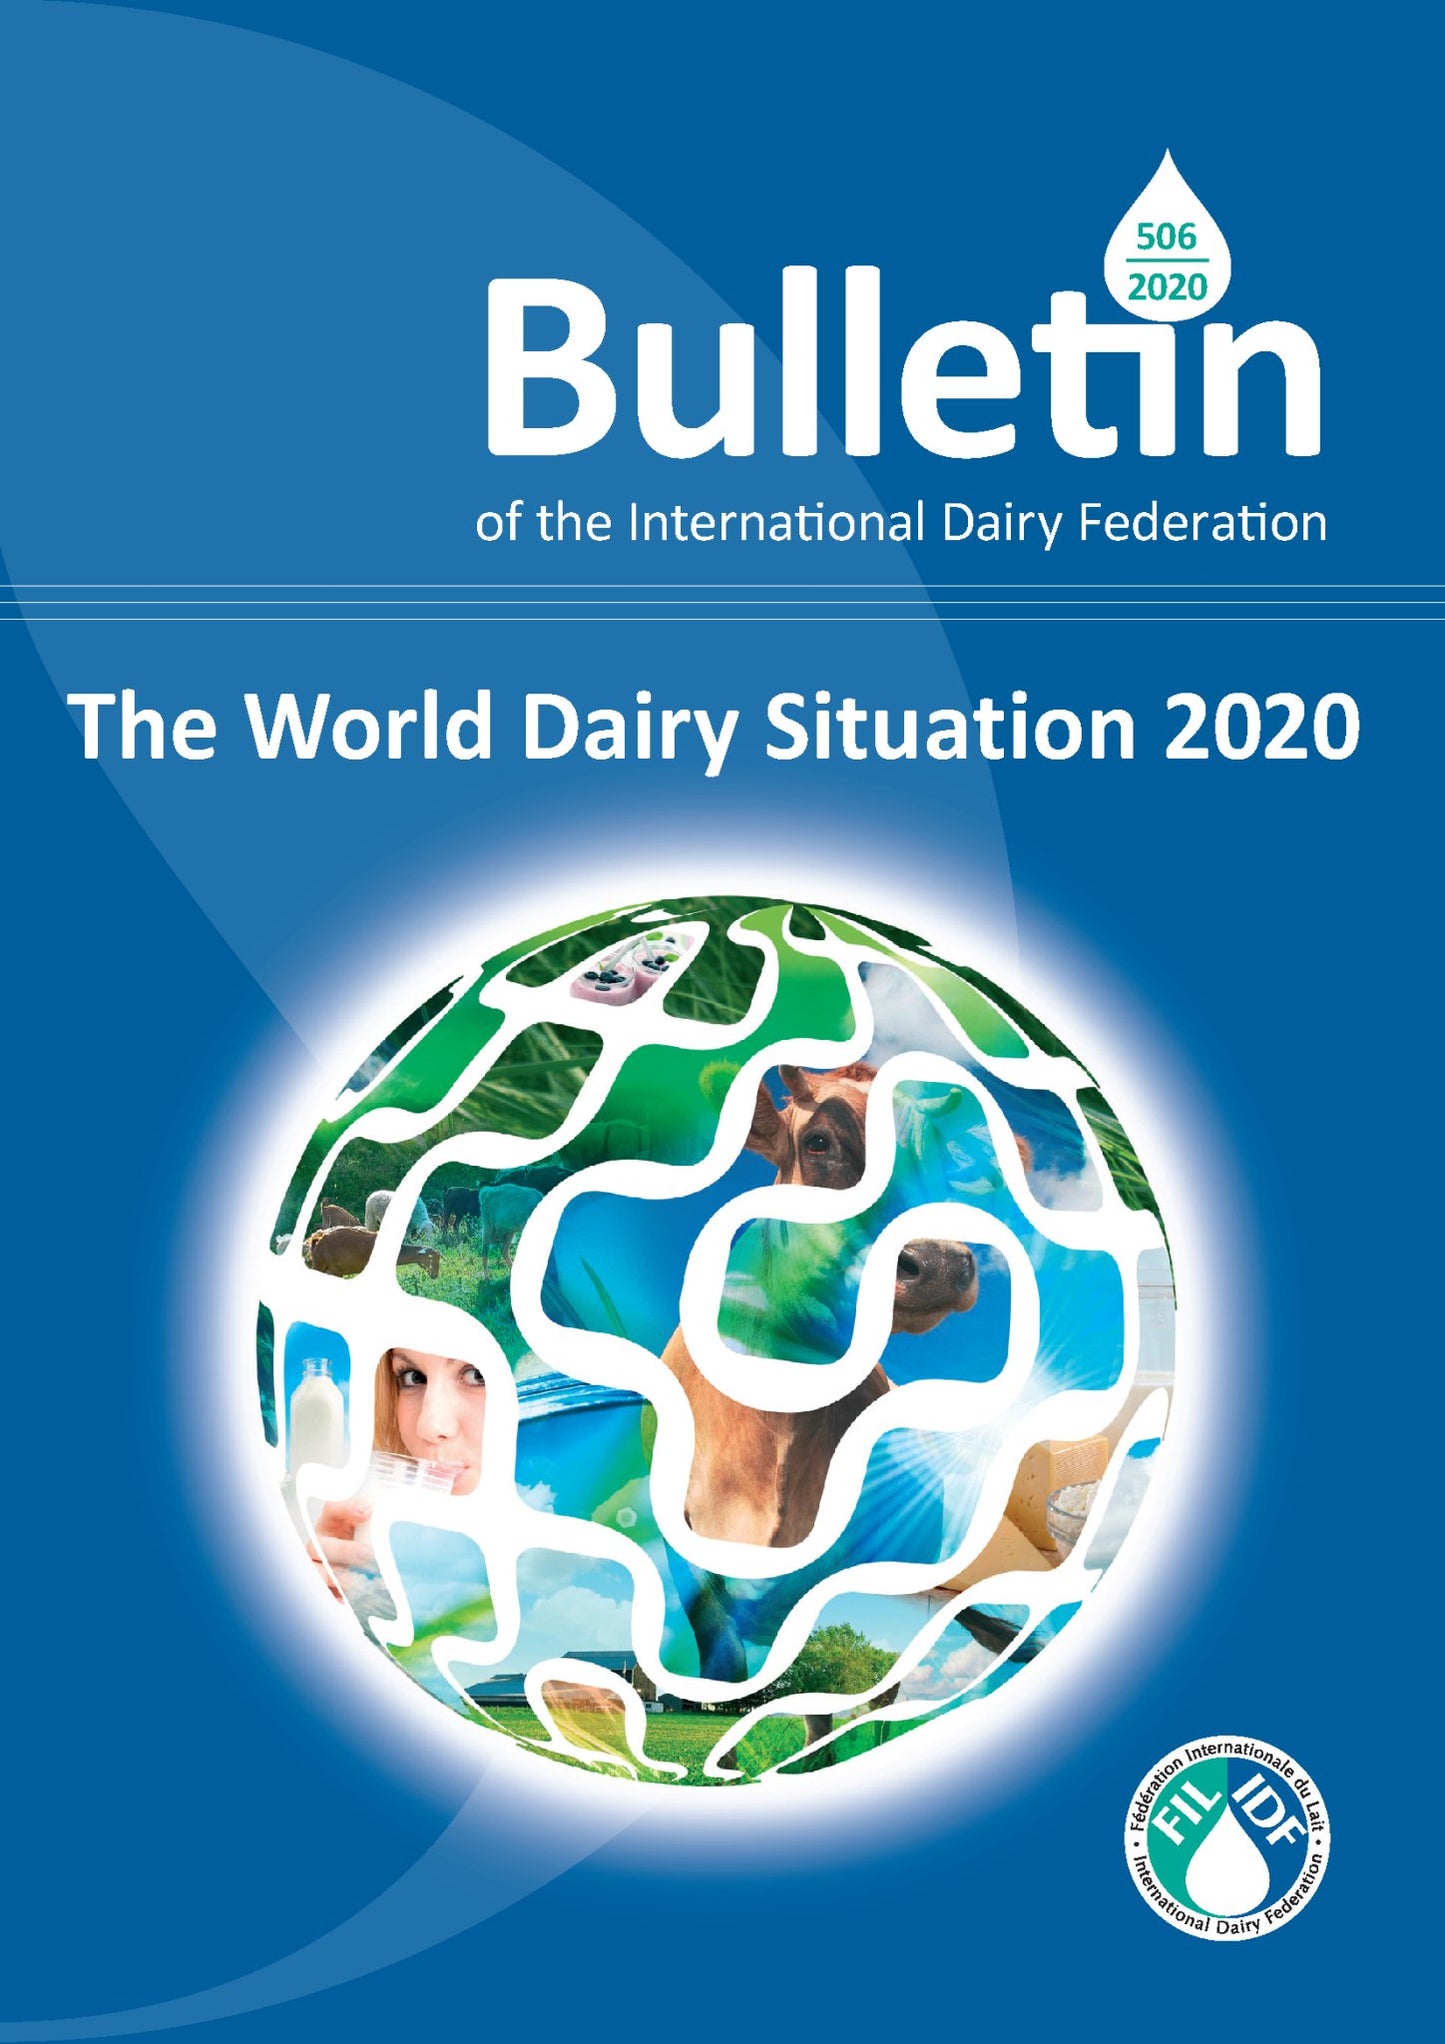 Bulletin of the IDF N° 506/2020: The World Dairy Situation 2020 - FIL-IDF